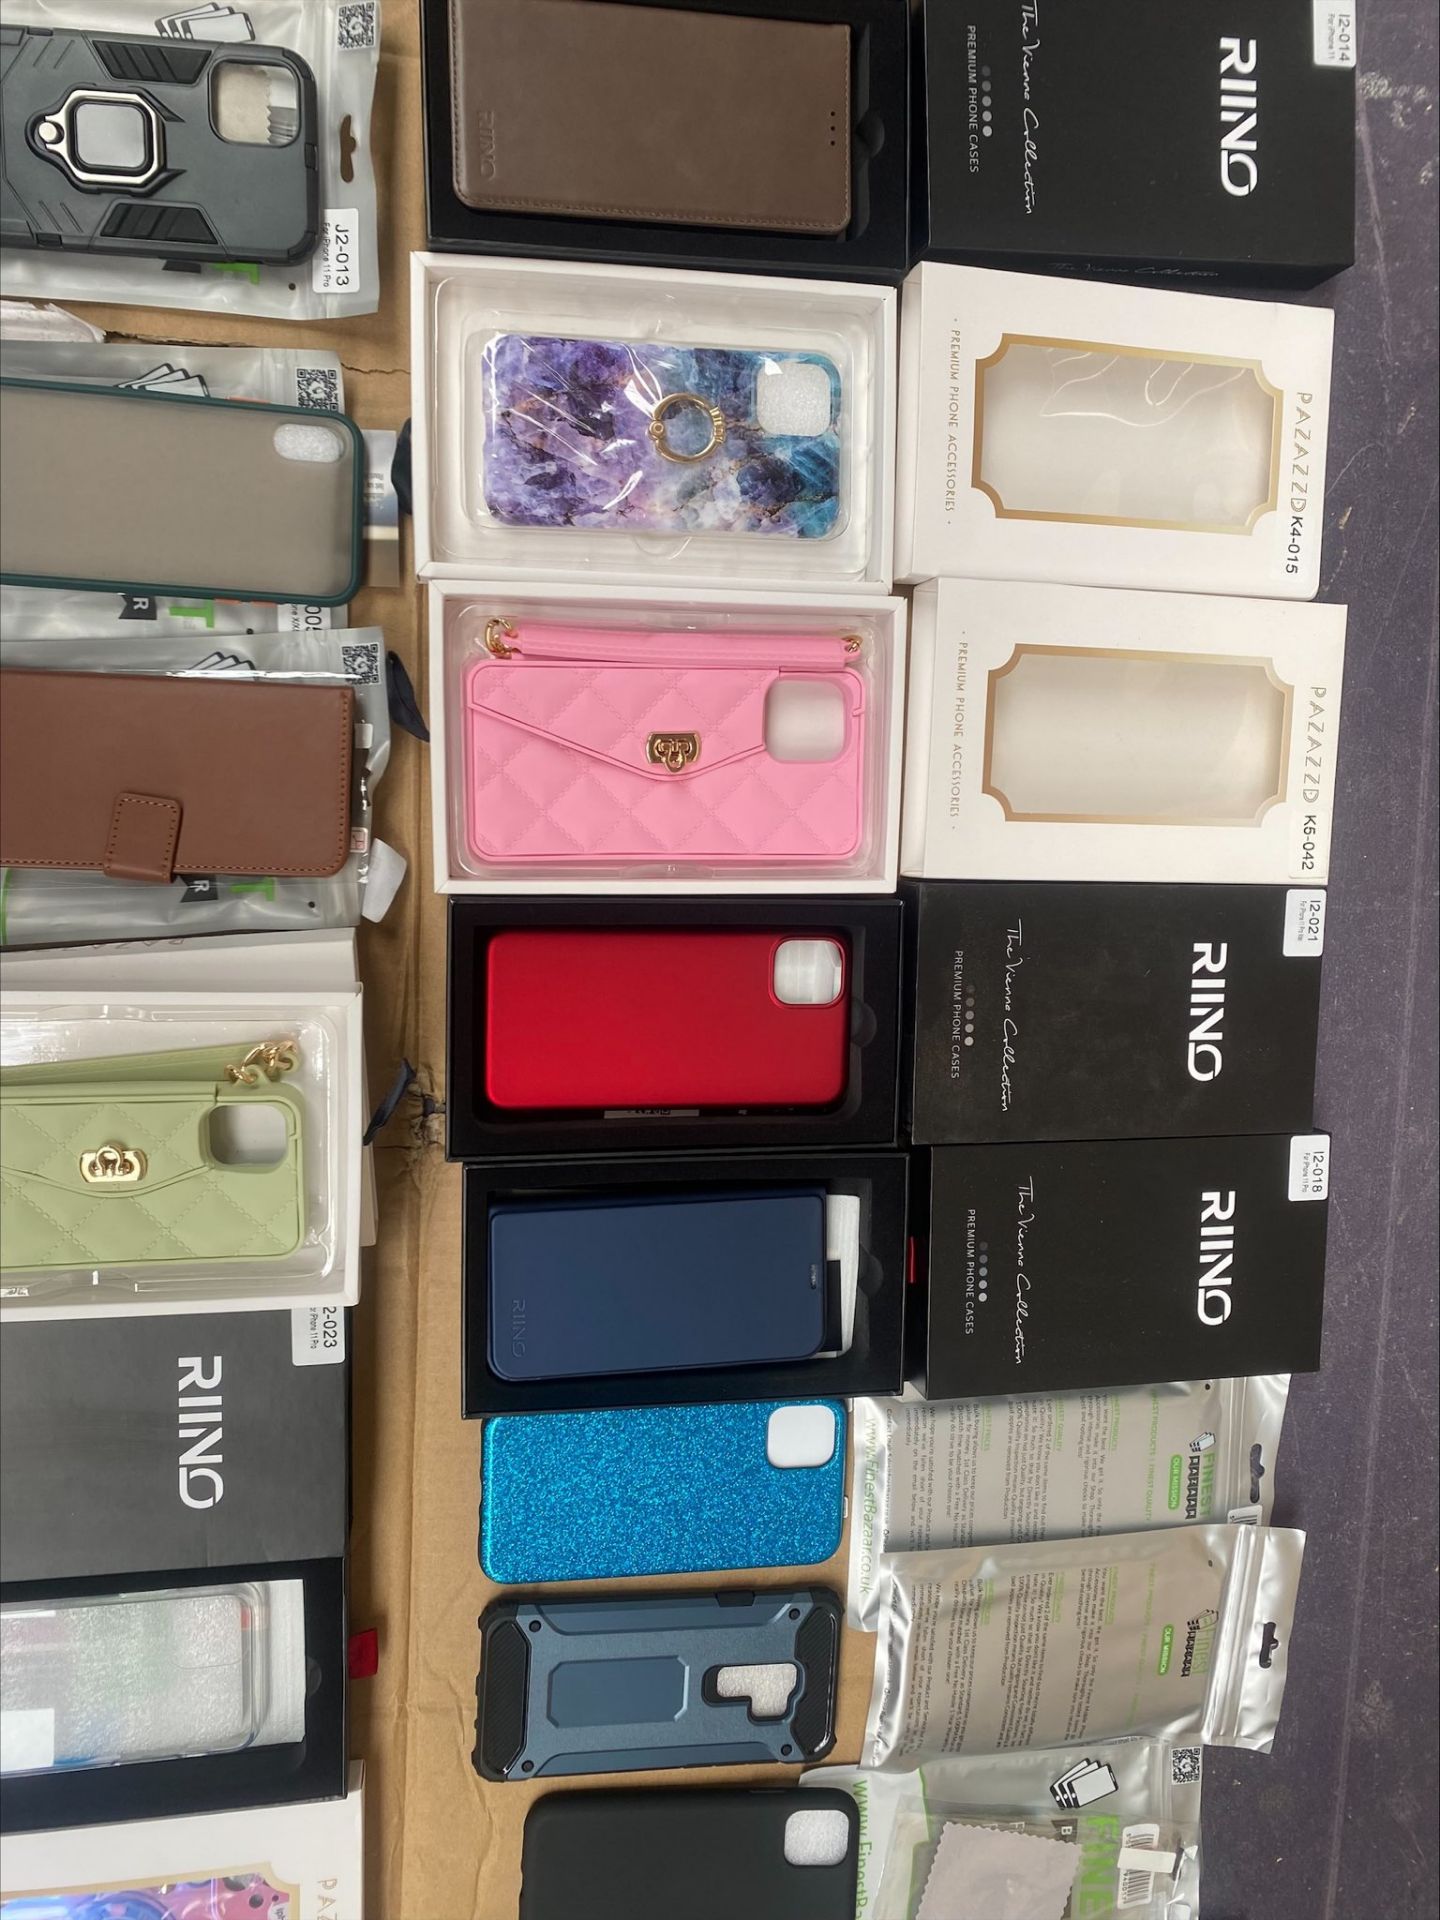 Joblot 50K Units iPhone, Samsung, Airpod, Apple Watch, Charging Cables, Phone Covers Accessories - Image 48 of 52